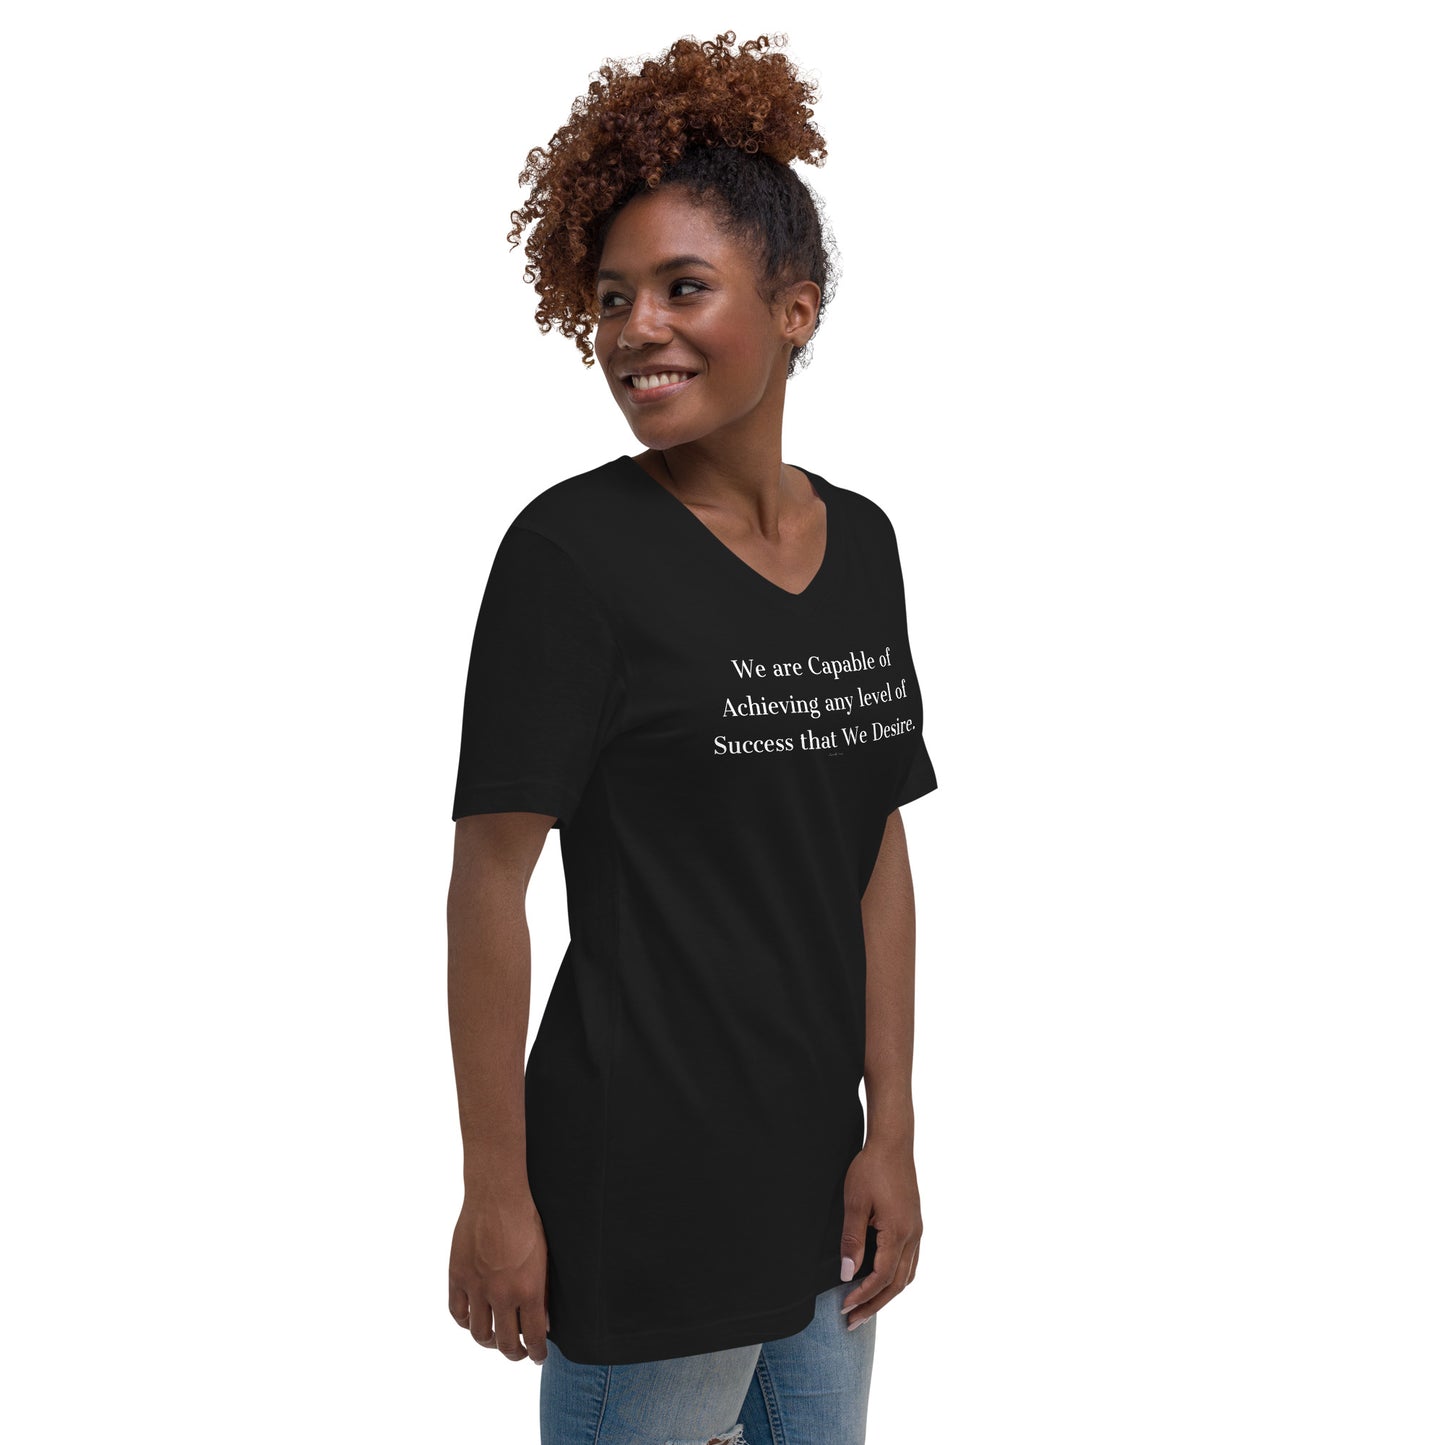 We are capable of achieving any level of success Unisex Short Sleeve V-Neck T-Shirt